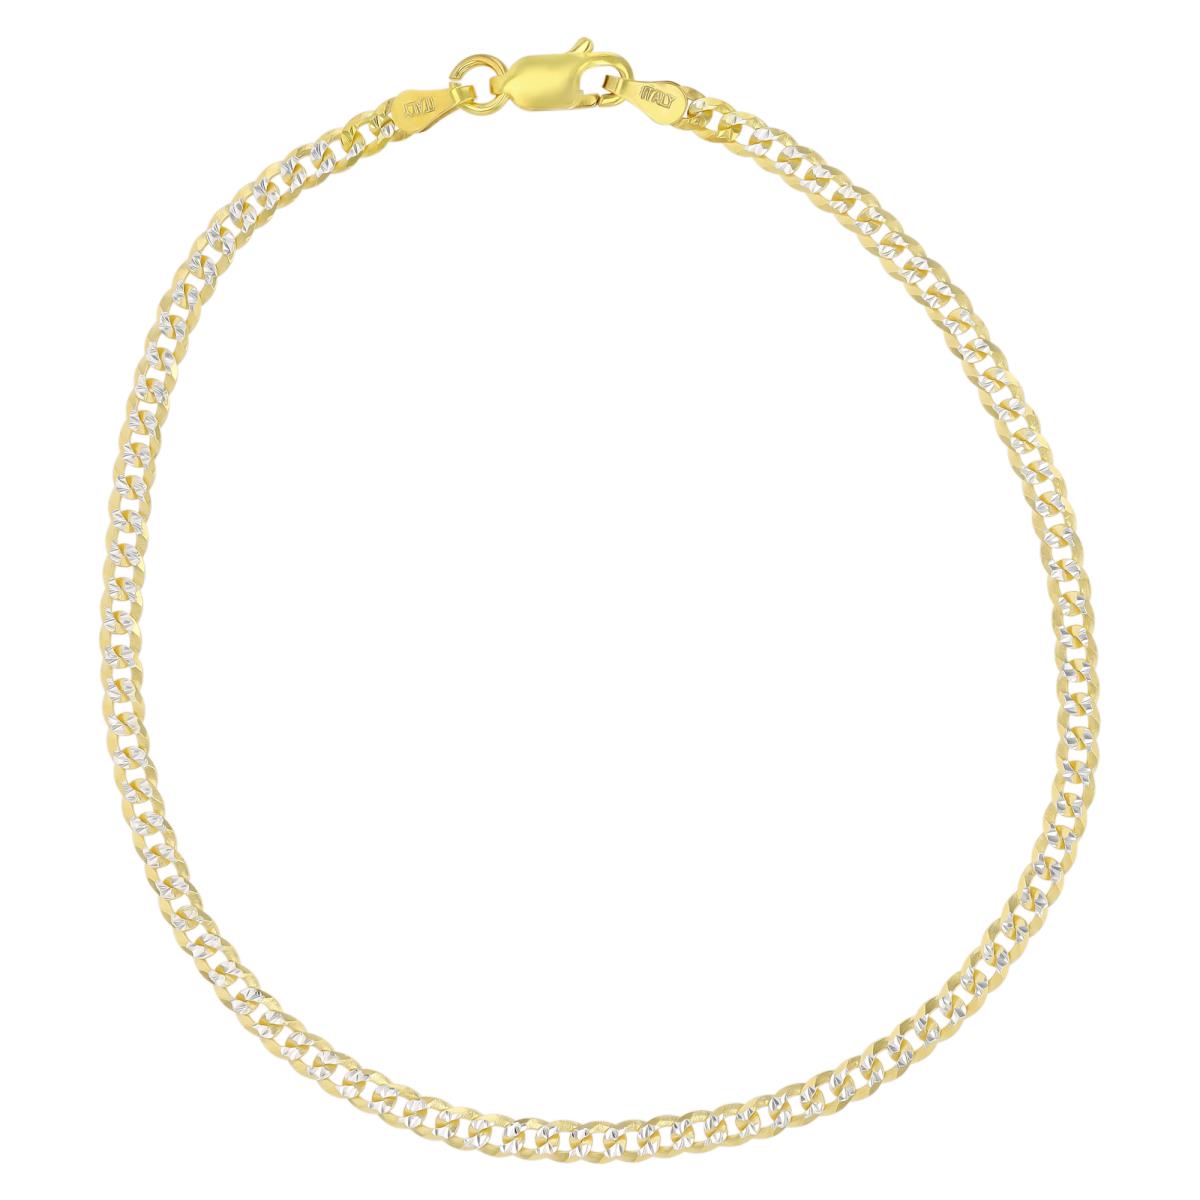 Sterling Silver Two-Tone DC 2.9mm 080 Curb Pave 9"Chain Bracelet